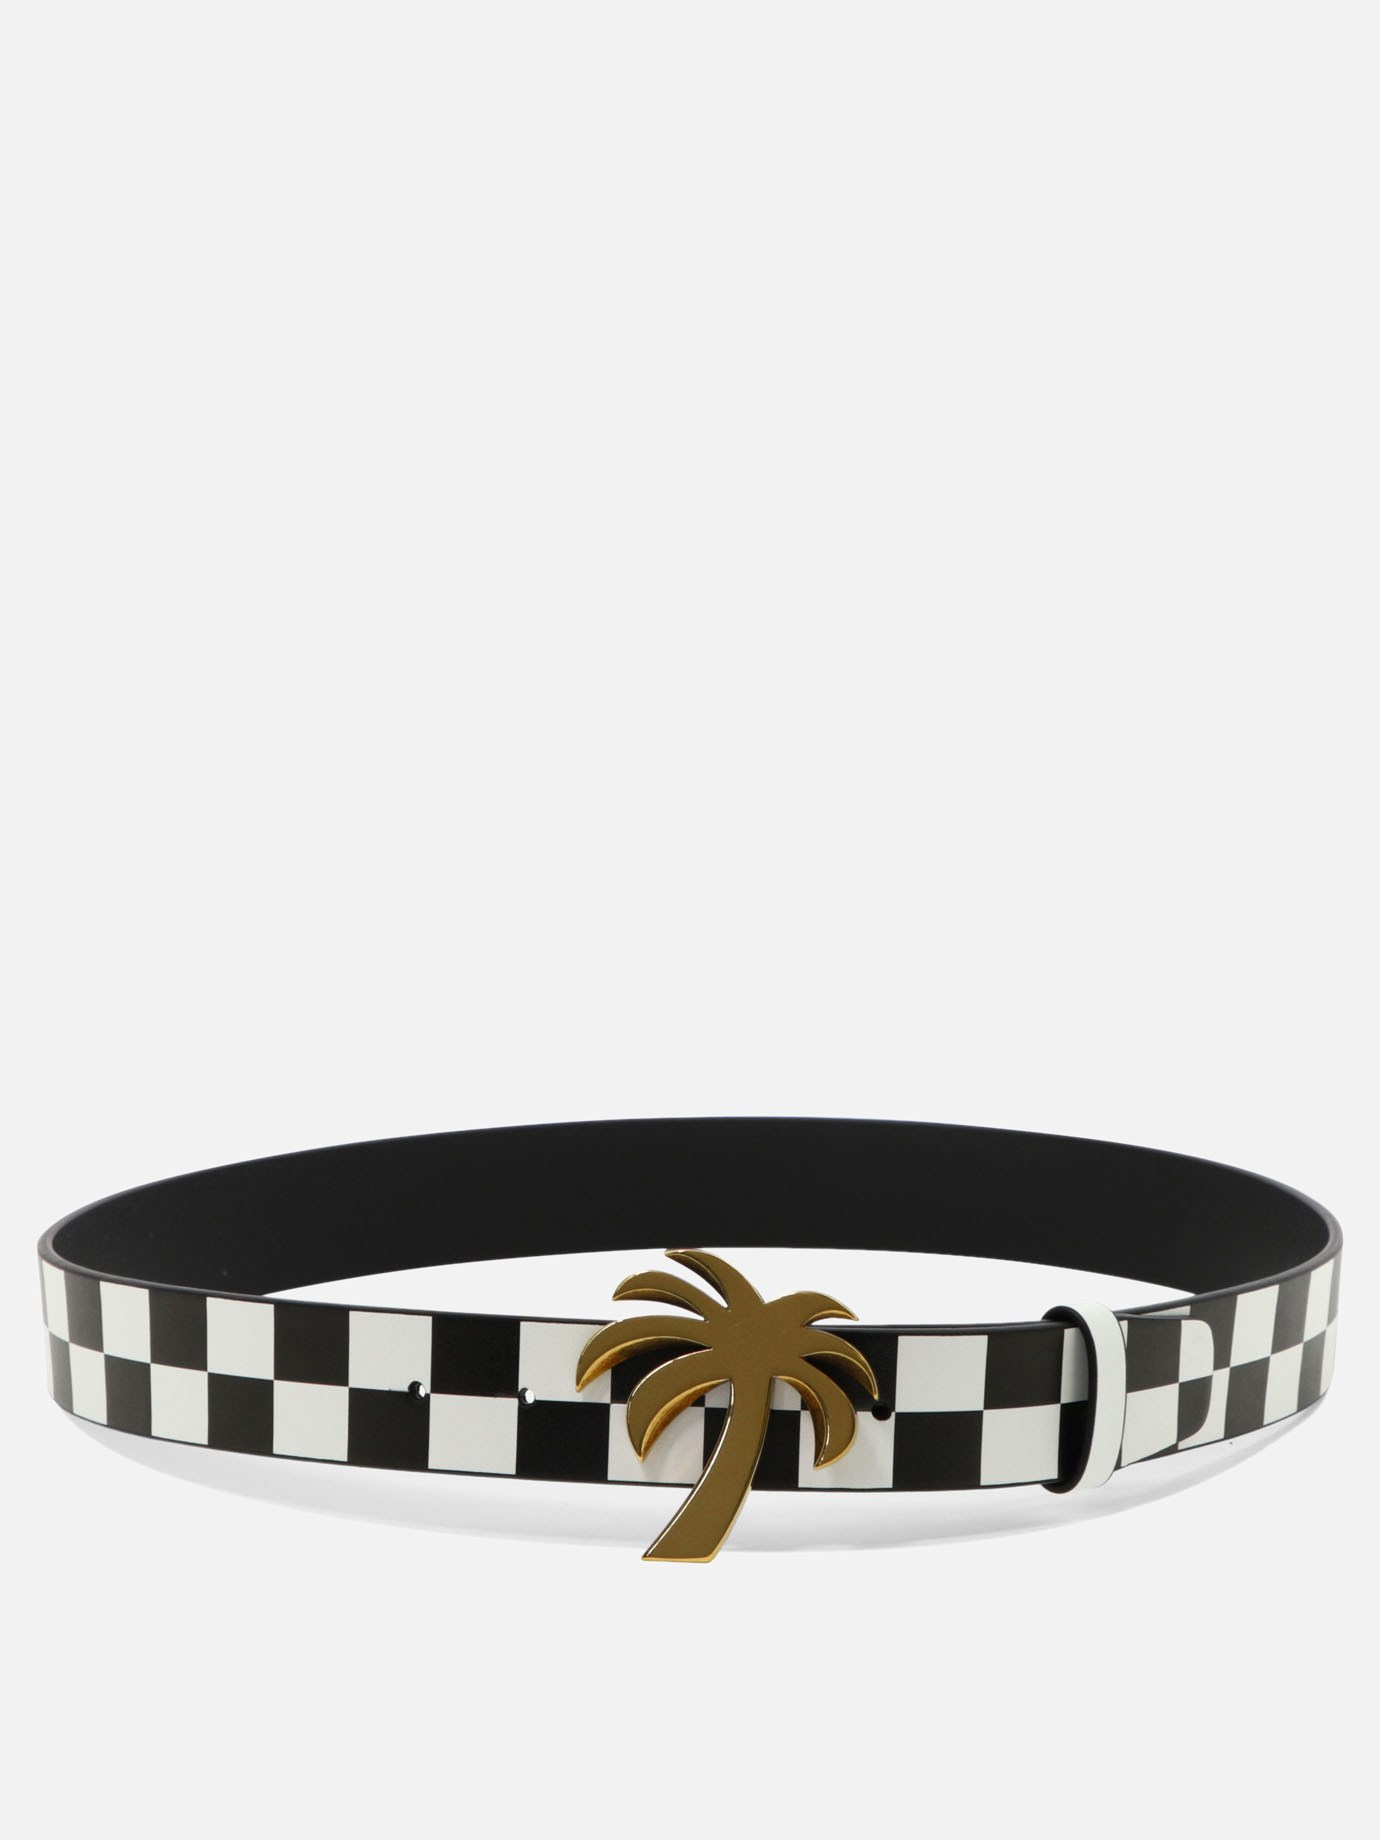  Damier  beltby Palm Angels - 0